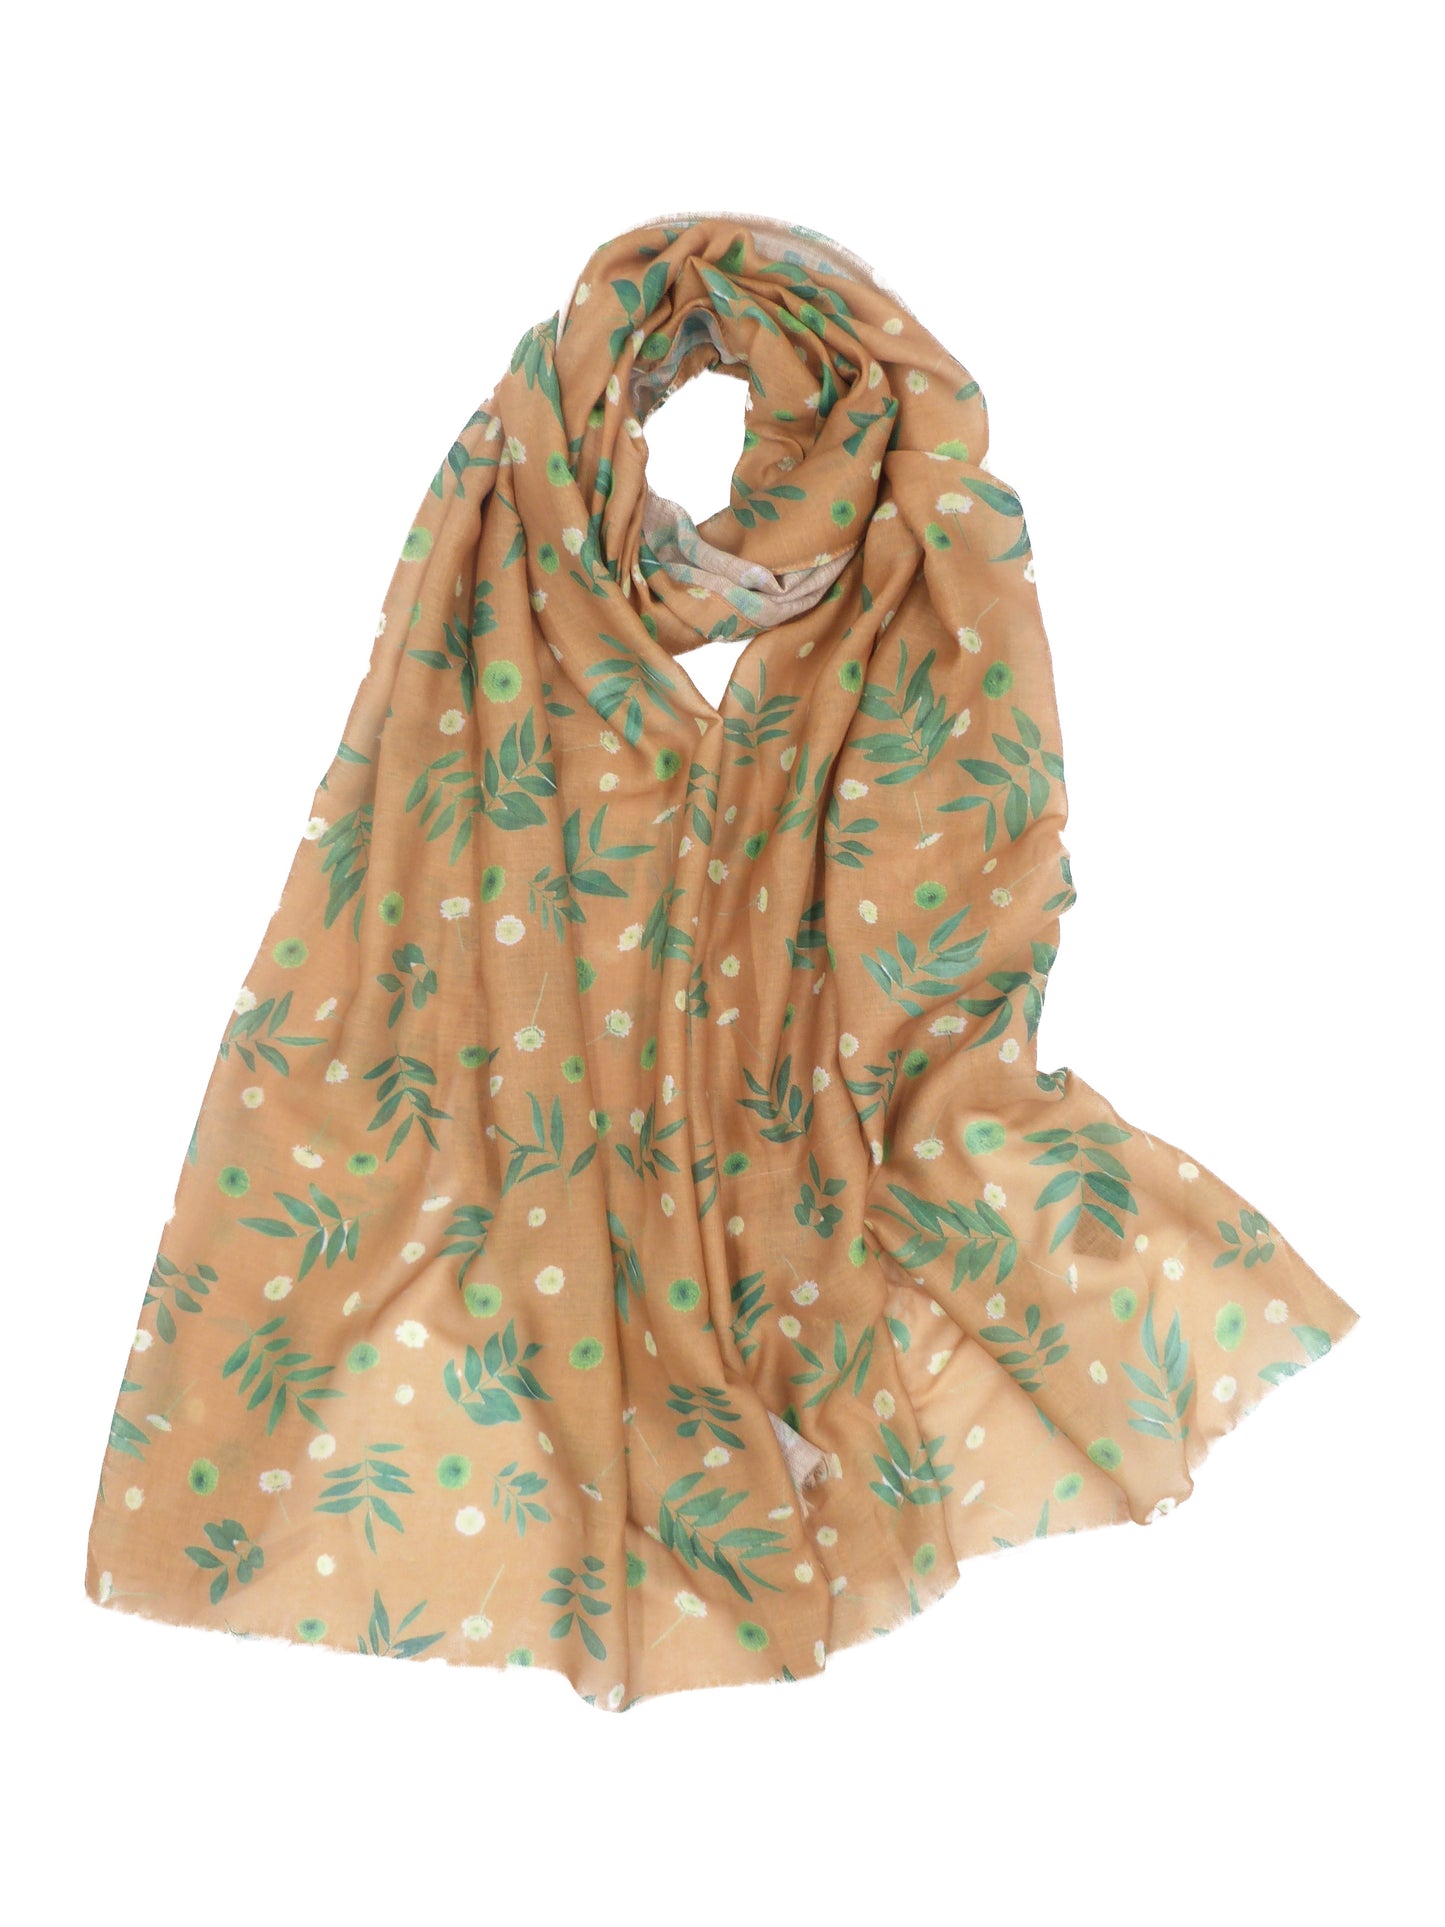 Mountain Ash Print Scarf Come With Gift Box